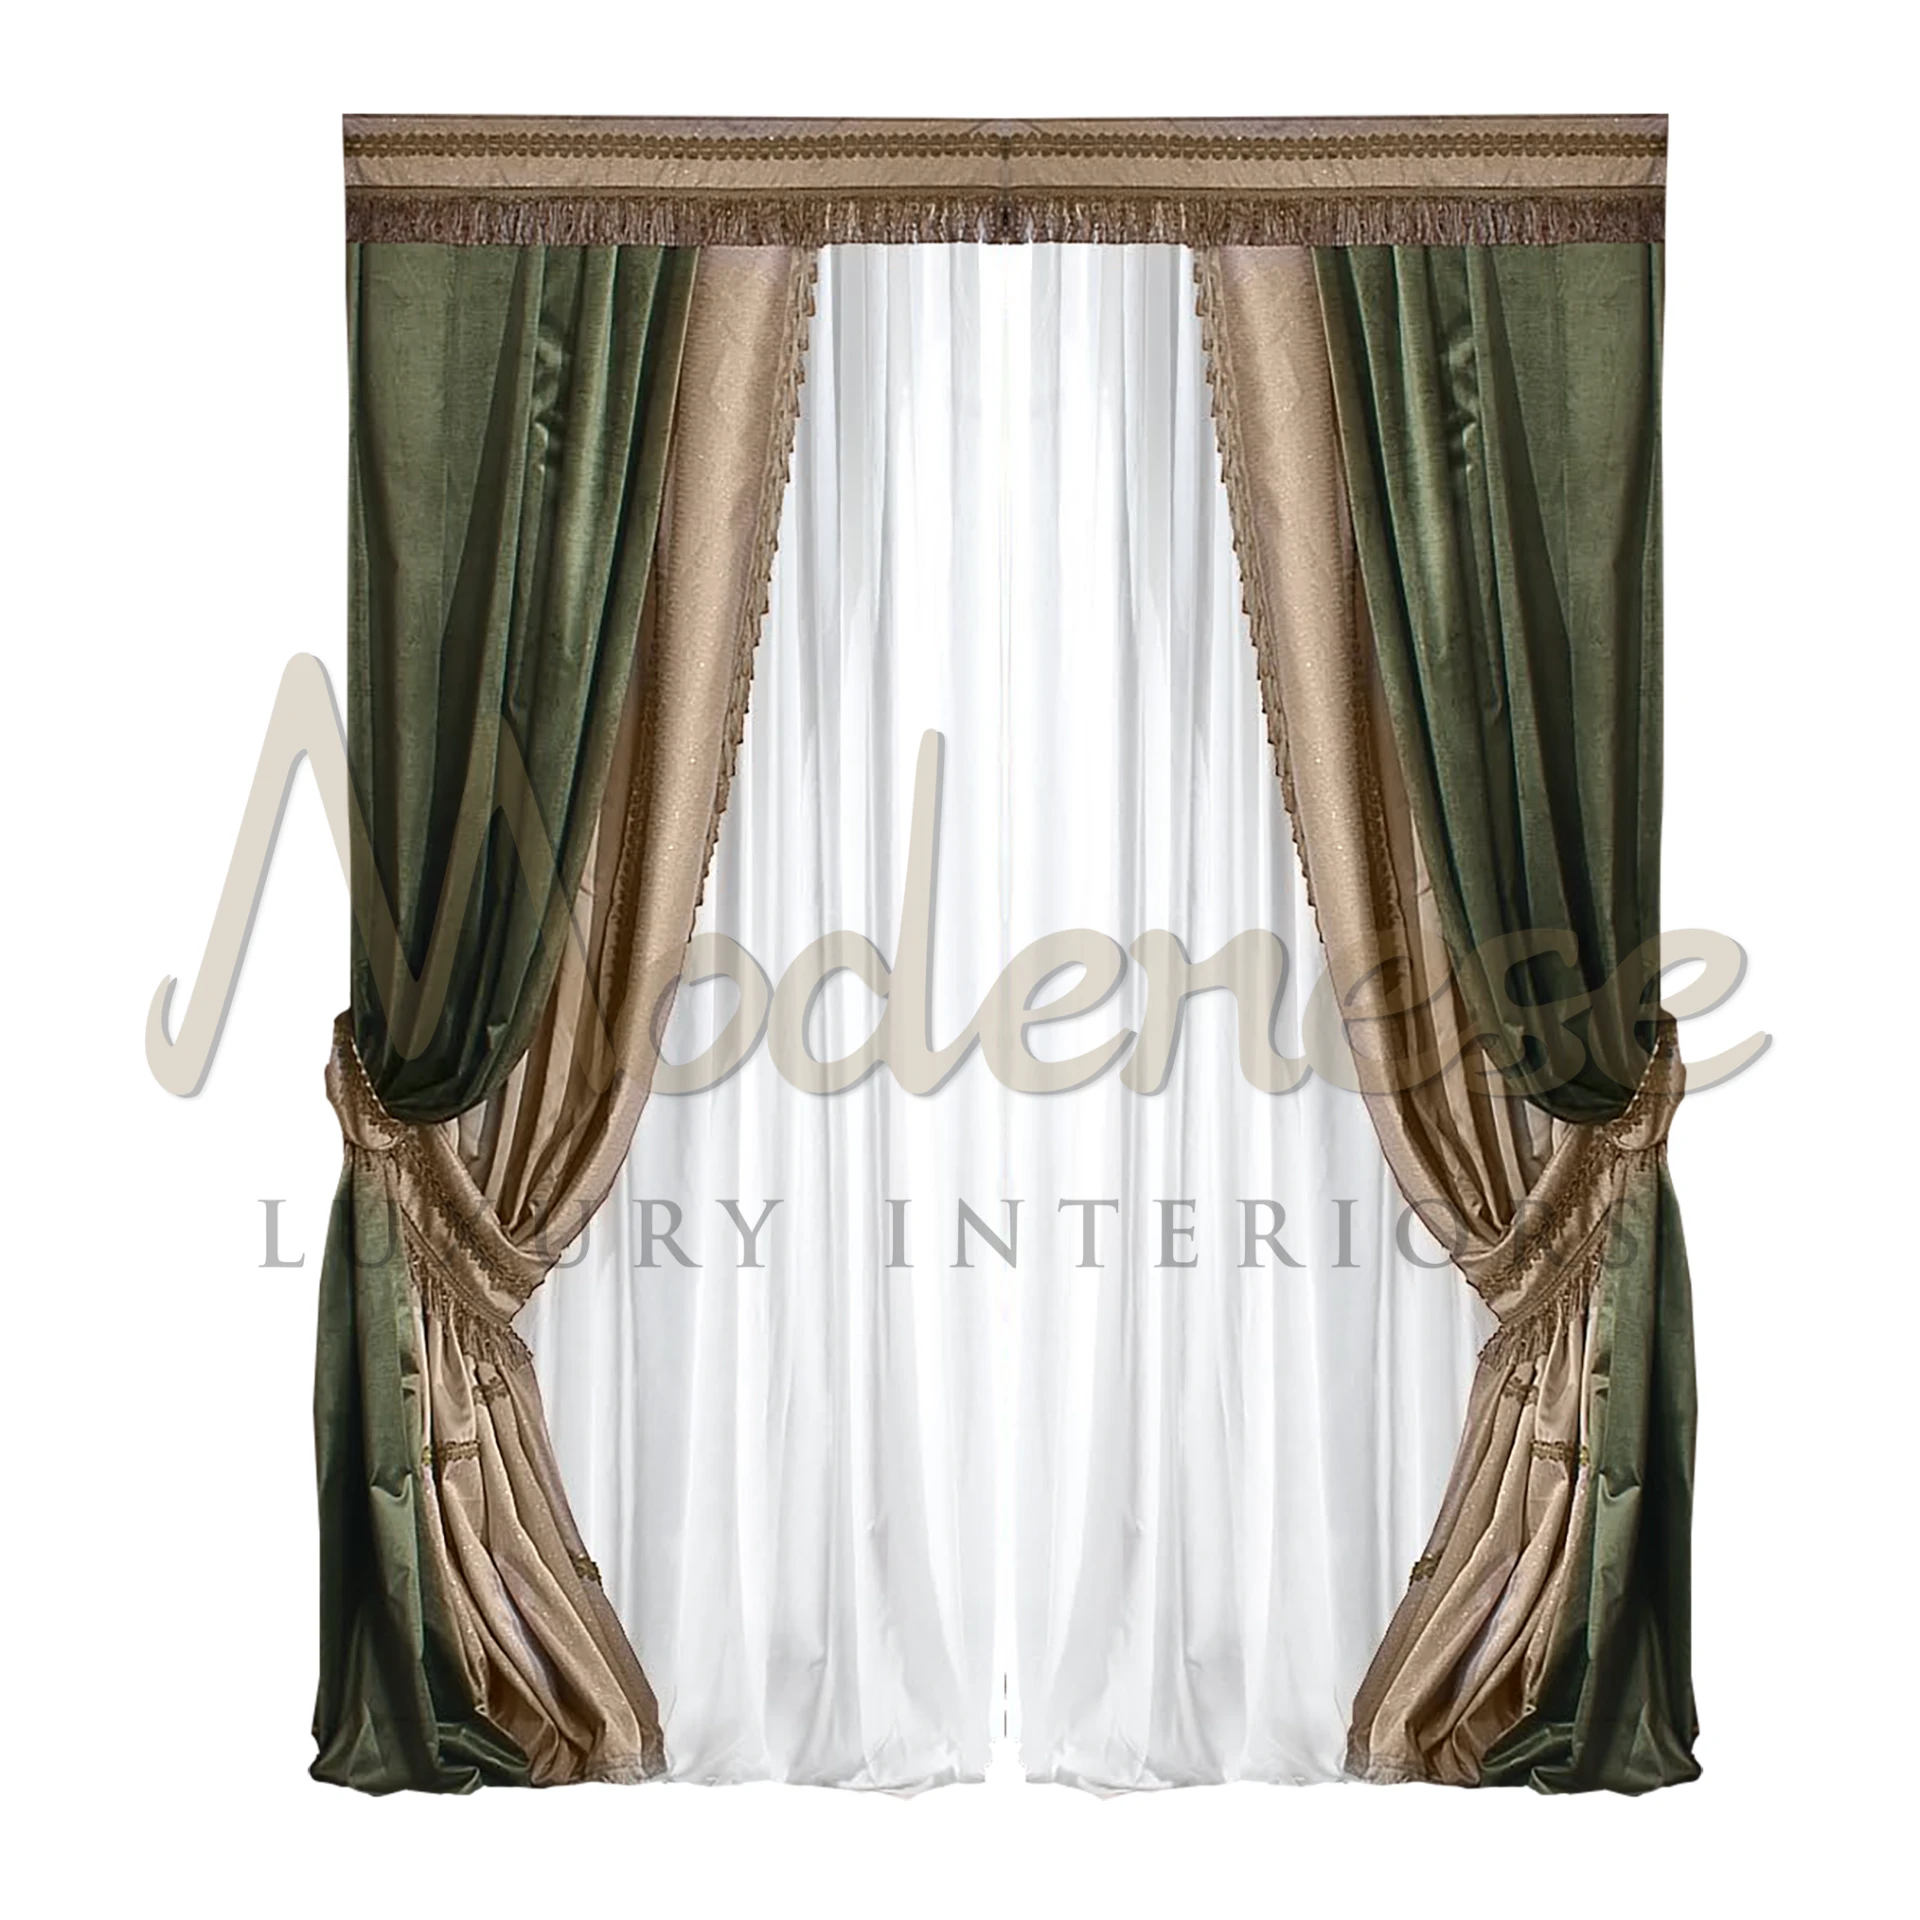 Classical Dark Green Curtains in plush velvet, exuding opulence and adding a rich, luxurious touch to the room's design.